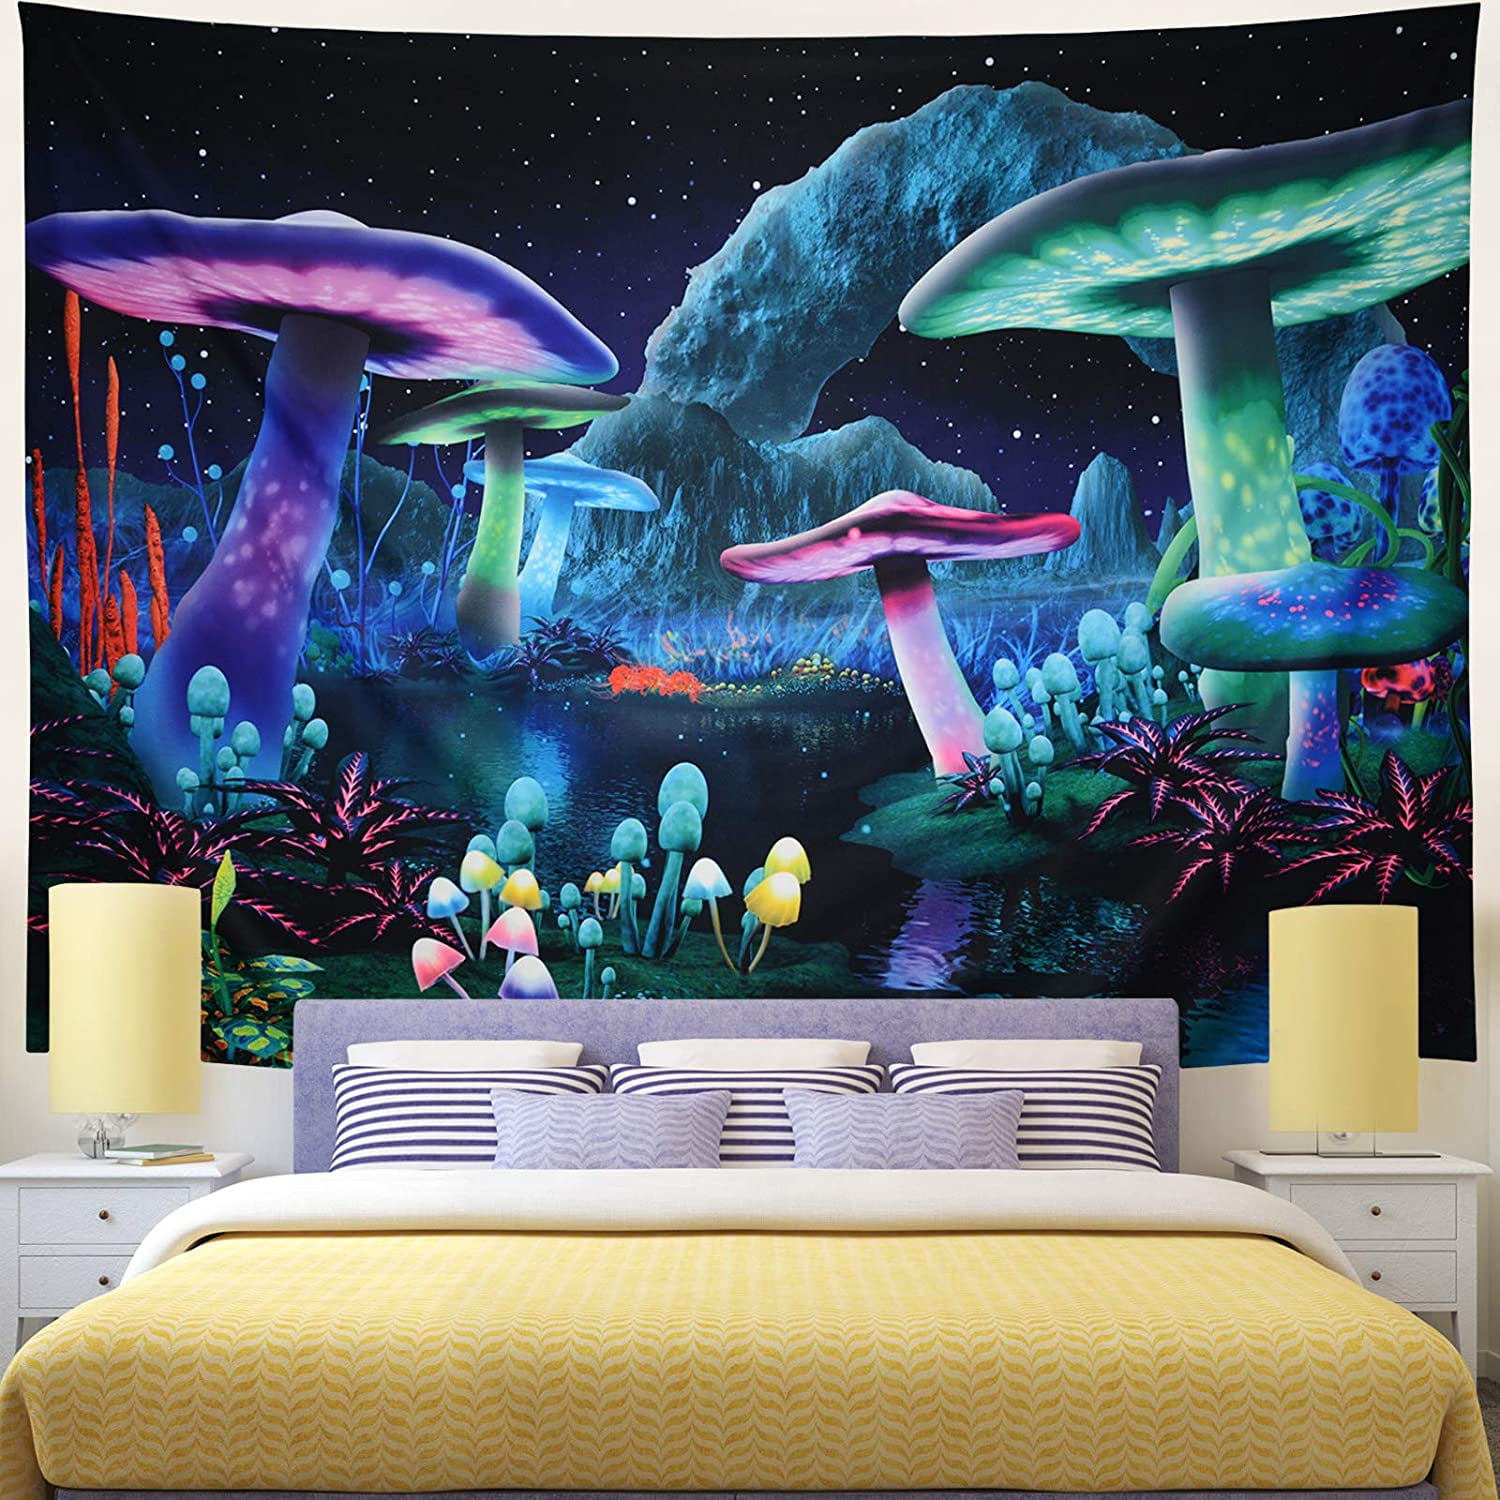 Psychedelic Mushroom Tapestry Wall Hanging Bedspread Trippy Room Home Art Decor